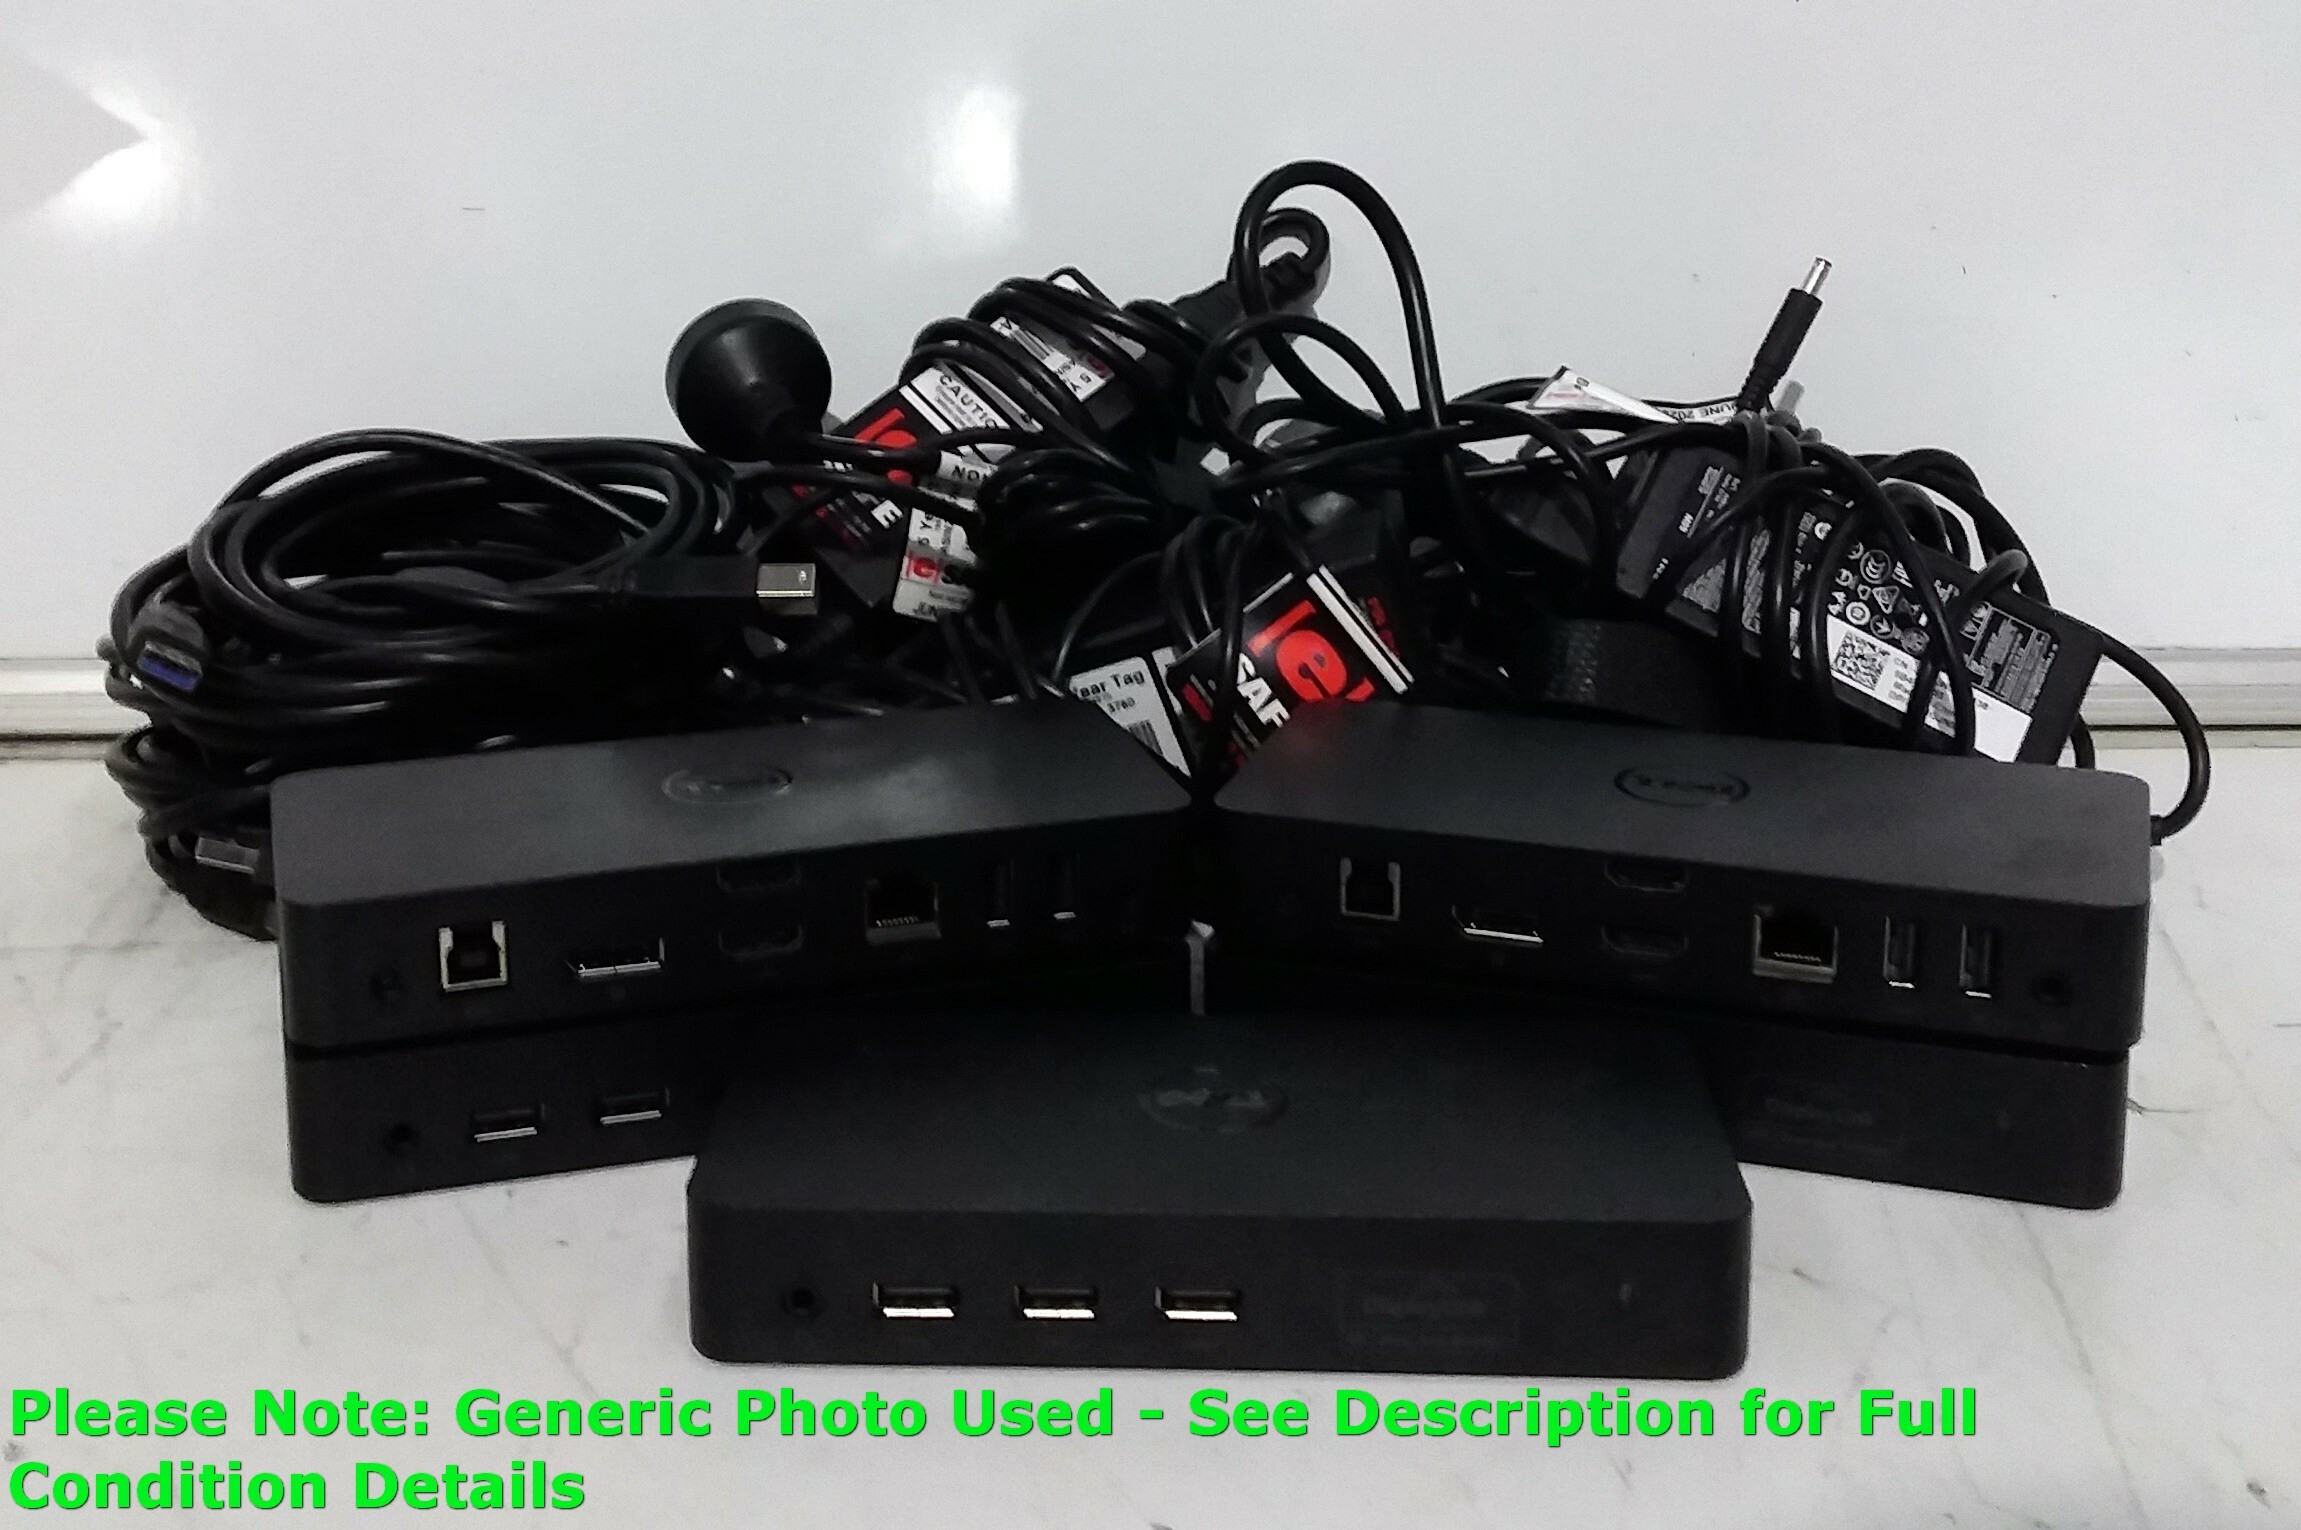 dell d3100 docking station does not charge laptop